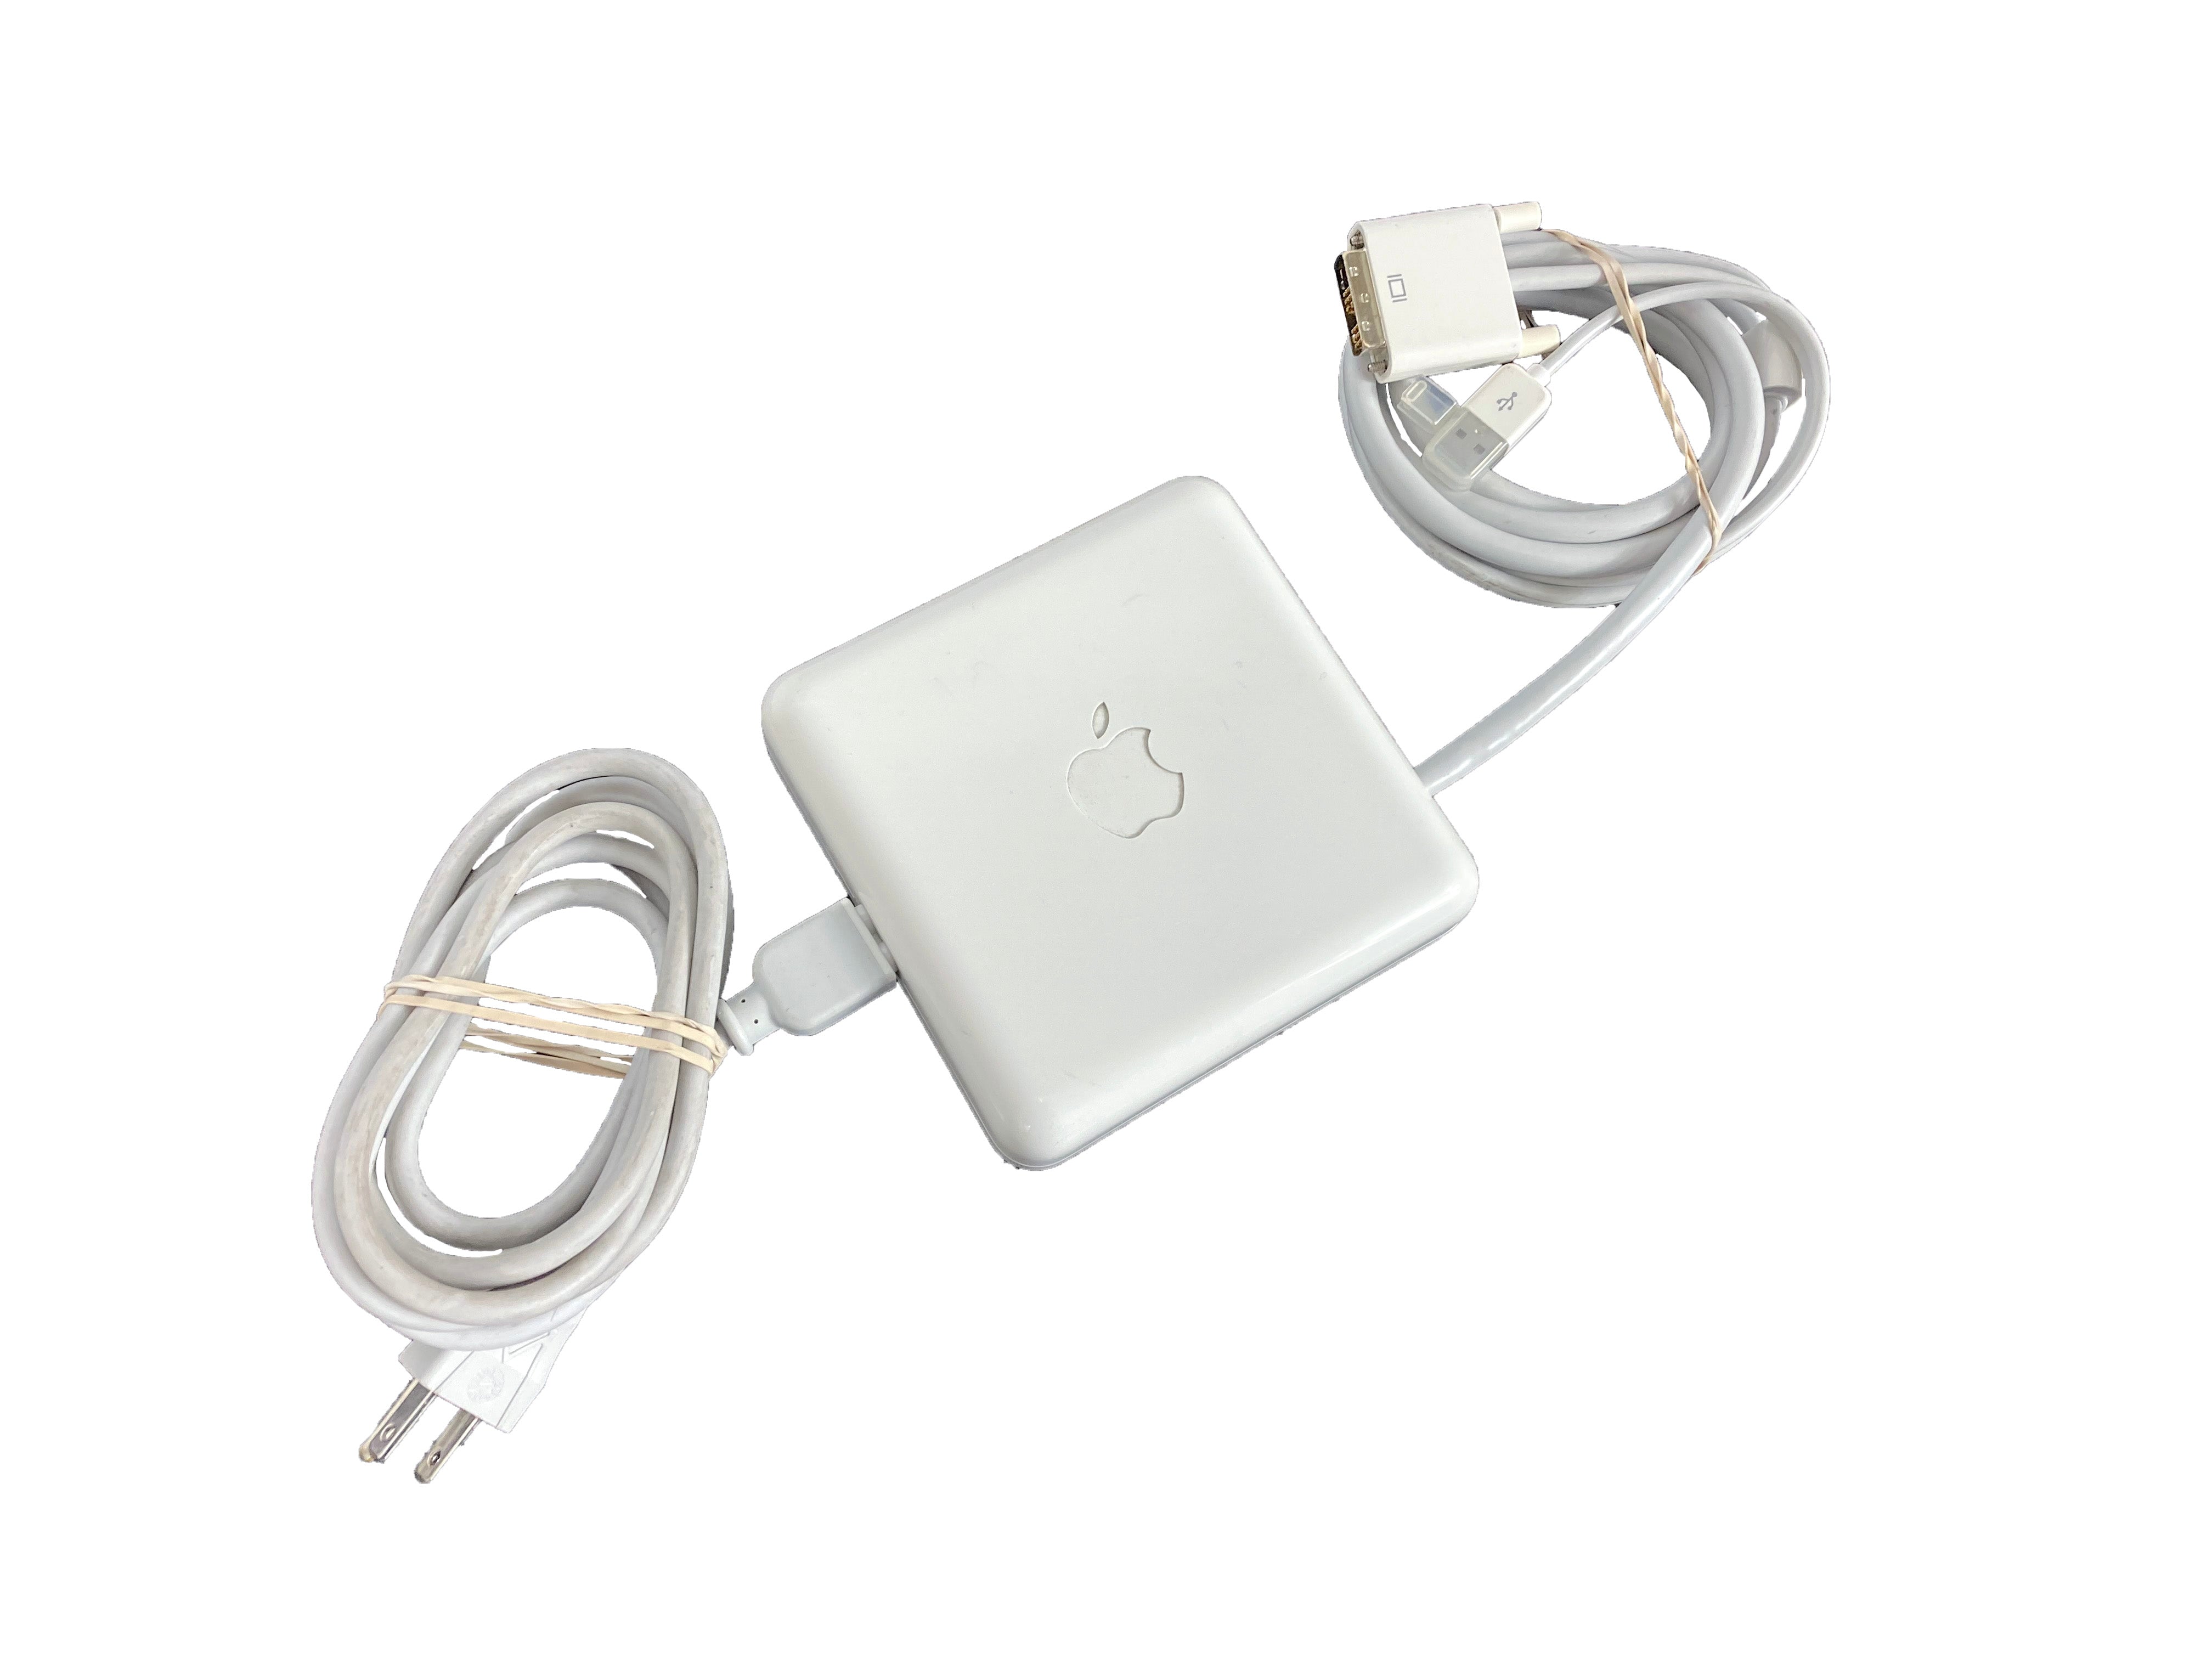 Apple DVI to ADC Adapter Power Supply